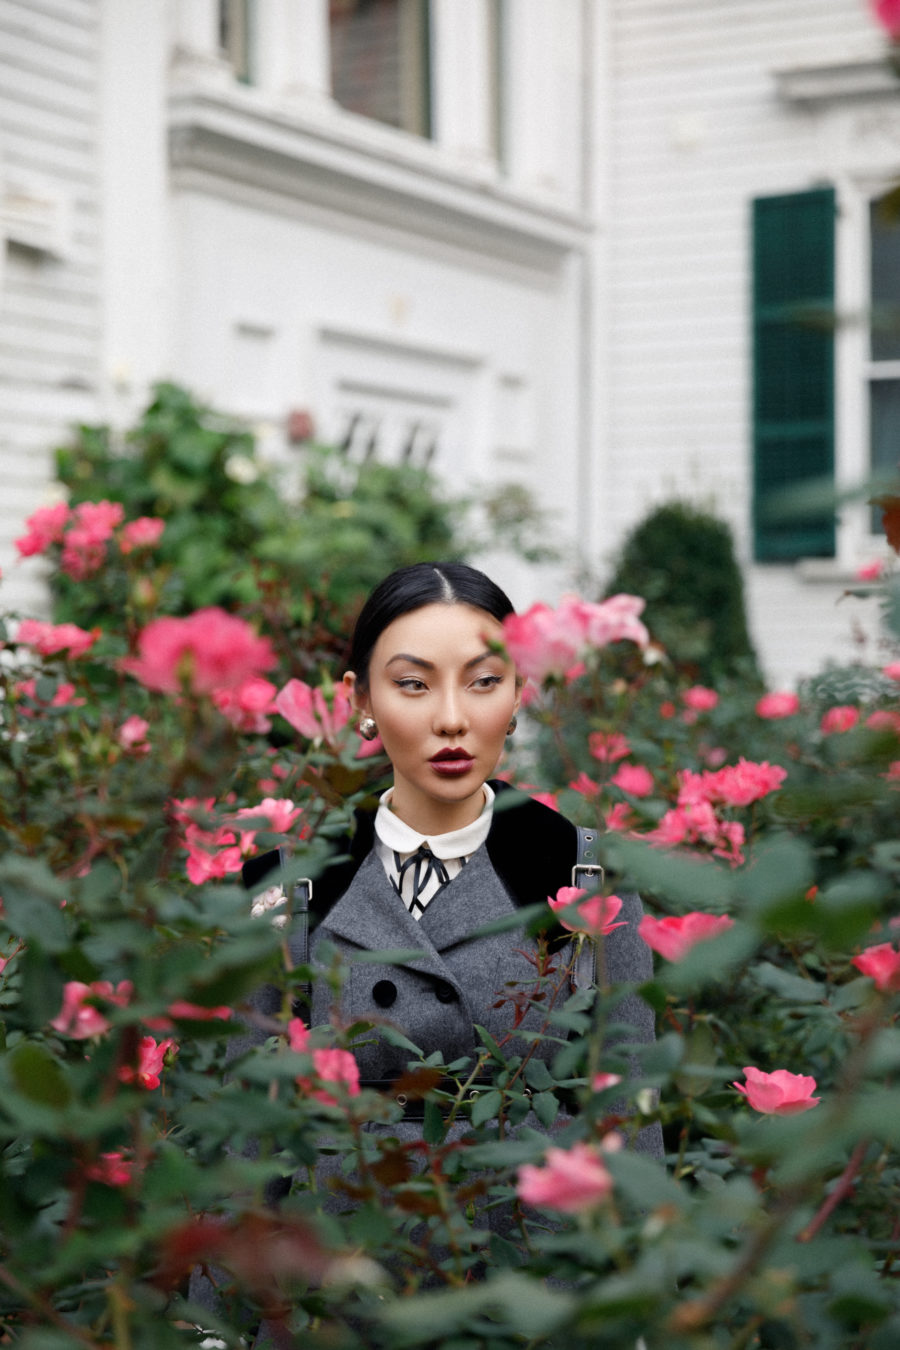 Jessica Wang wearing a gray blazer with a collared shirt in a rose garden // Jessica Wang - Notjessfashion.com